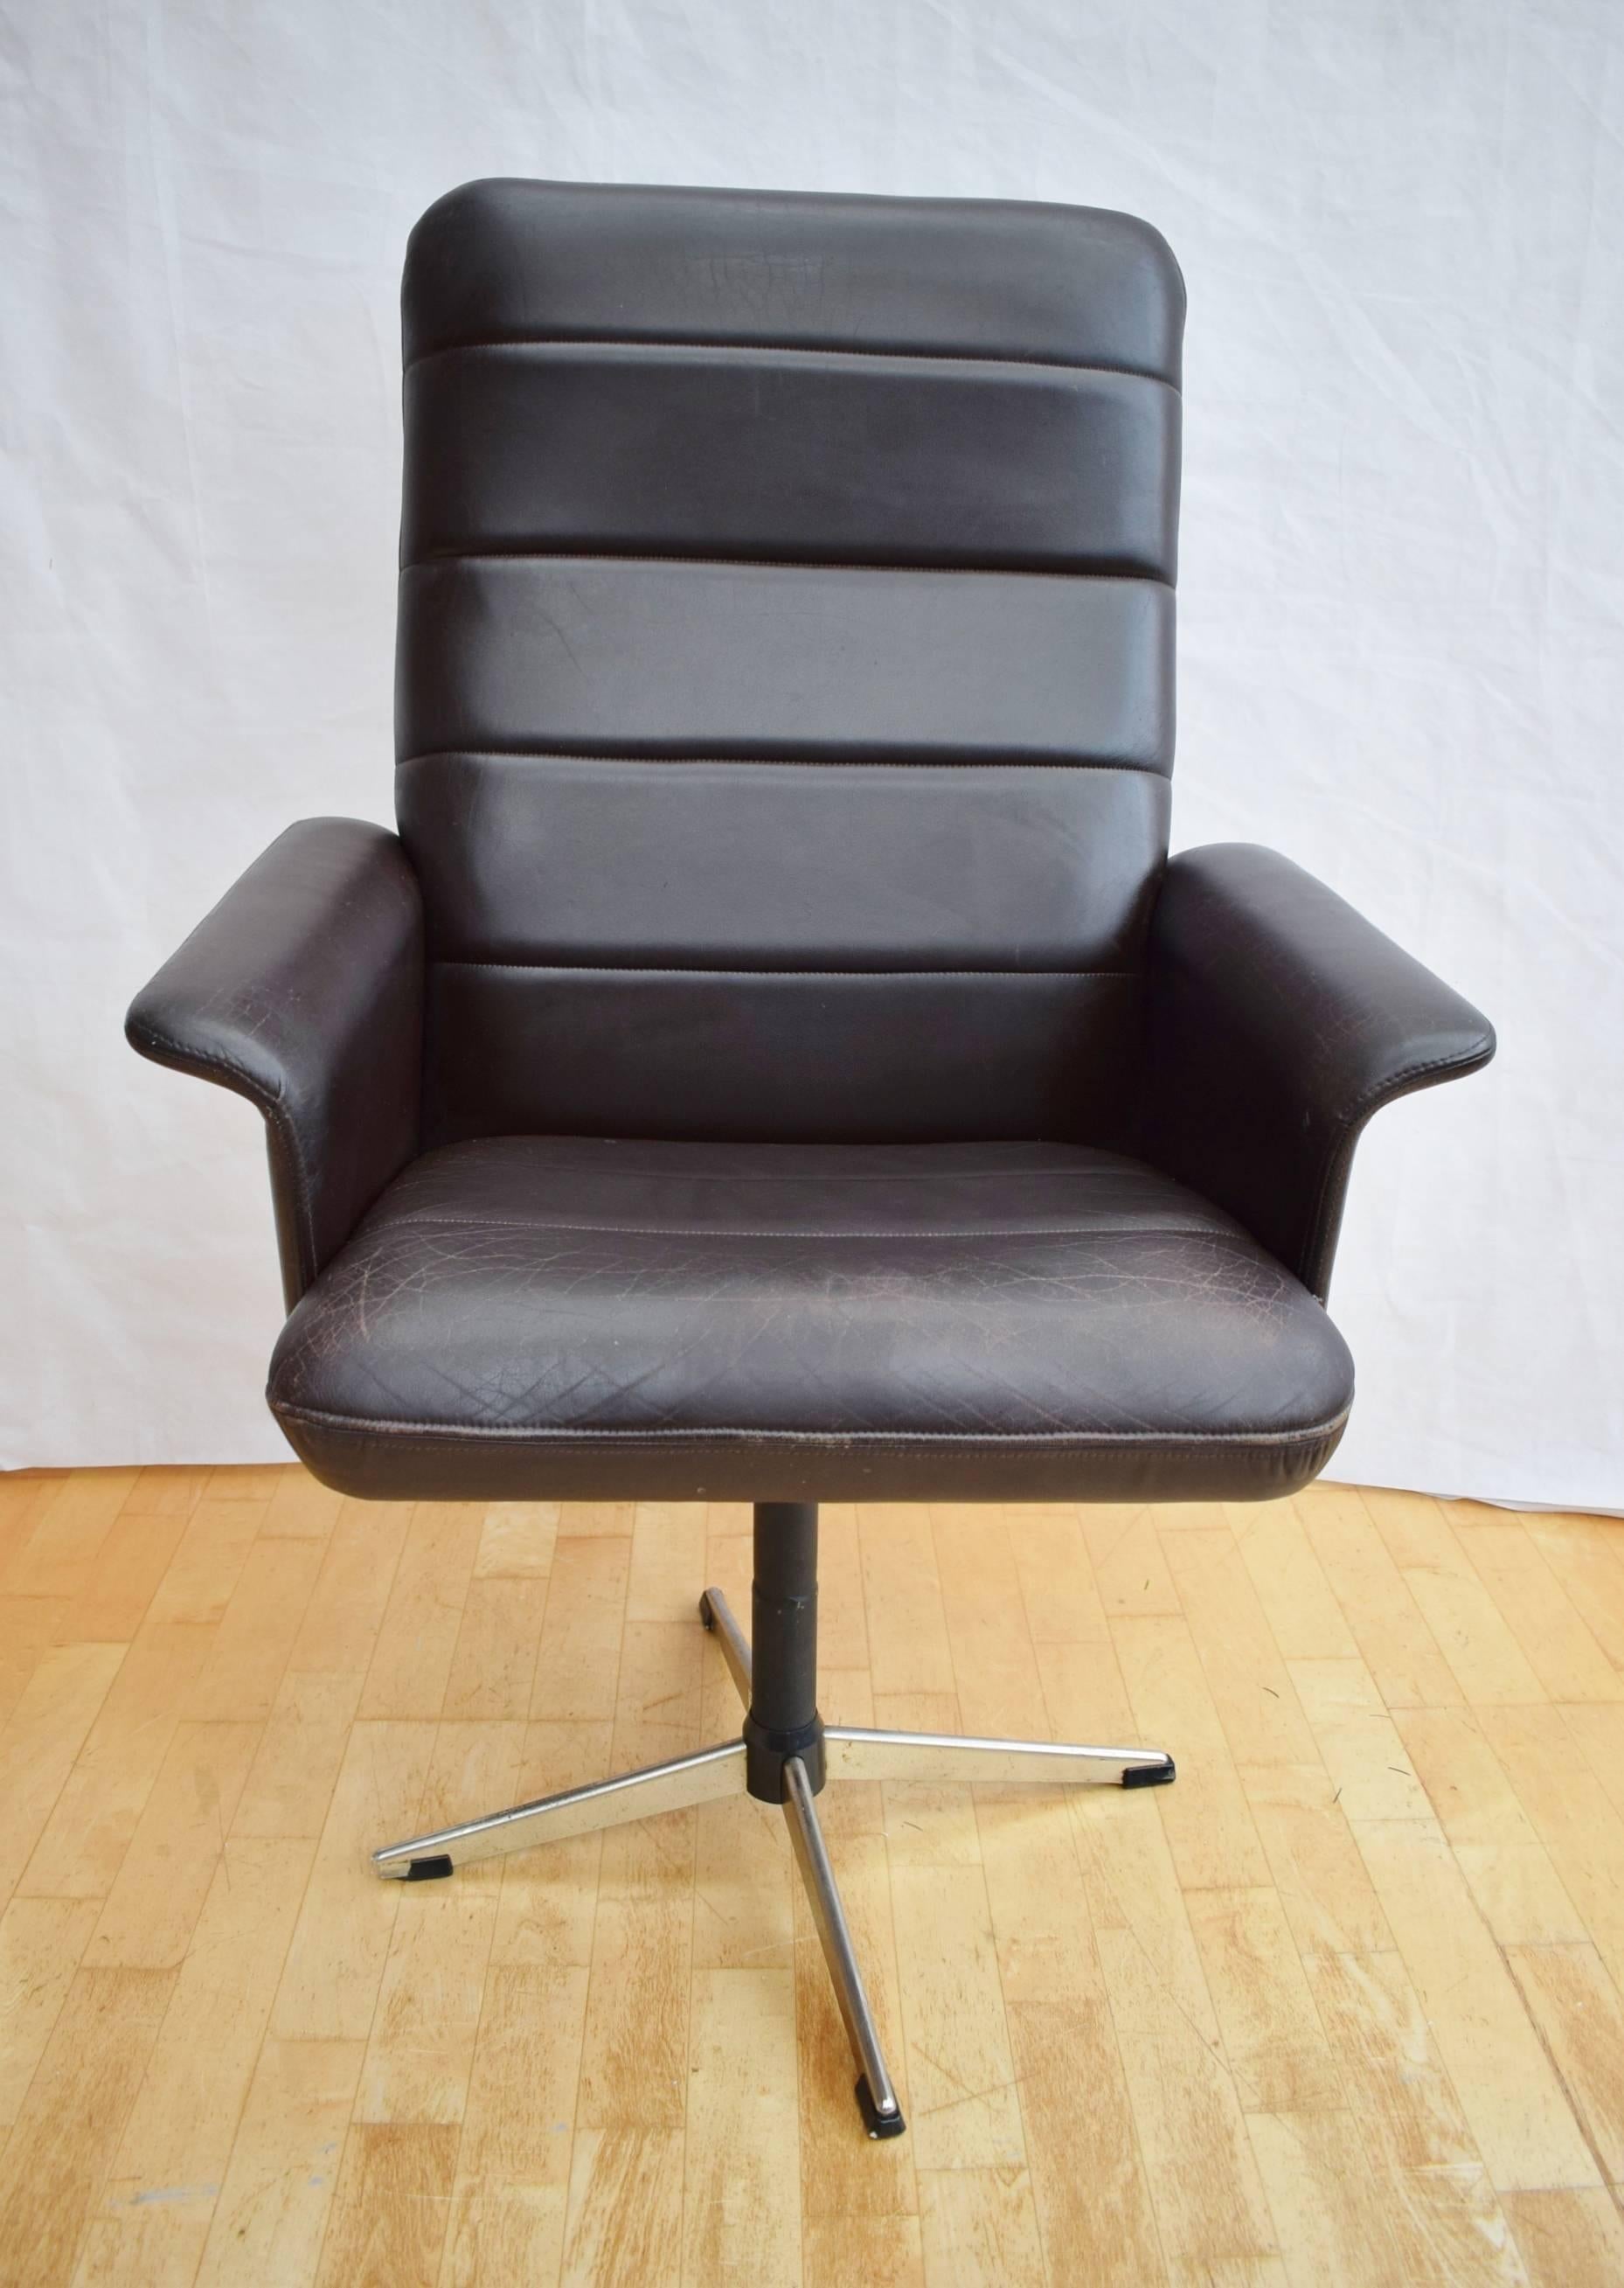 Late 20th Century Mid-Century Danish Brown Leather Swivel Office Desk Chair by Komfort, 1970s